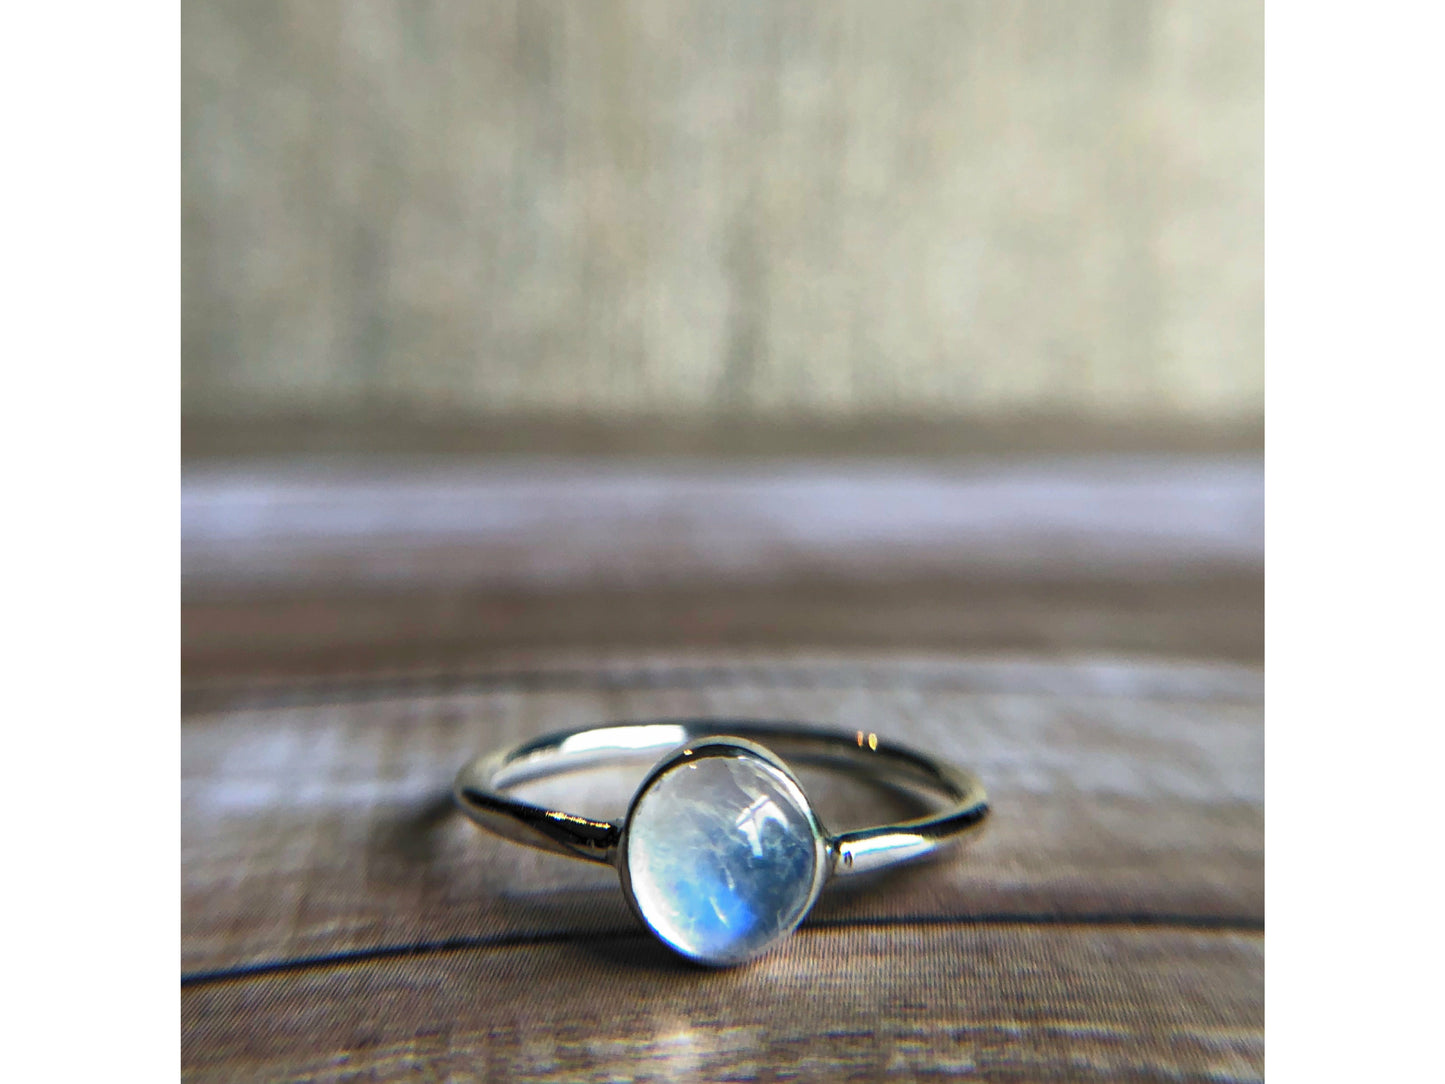 small moonstone ring with simple band. Bezel set.